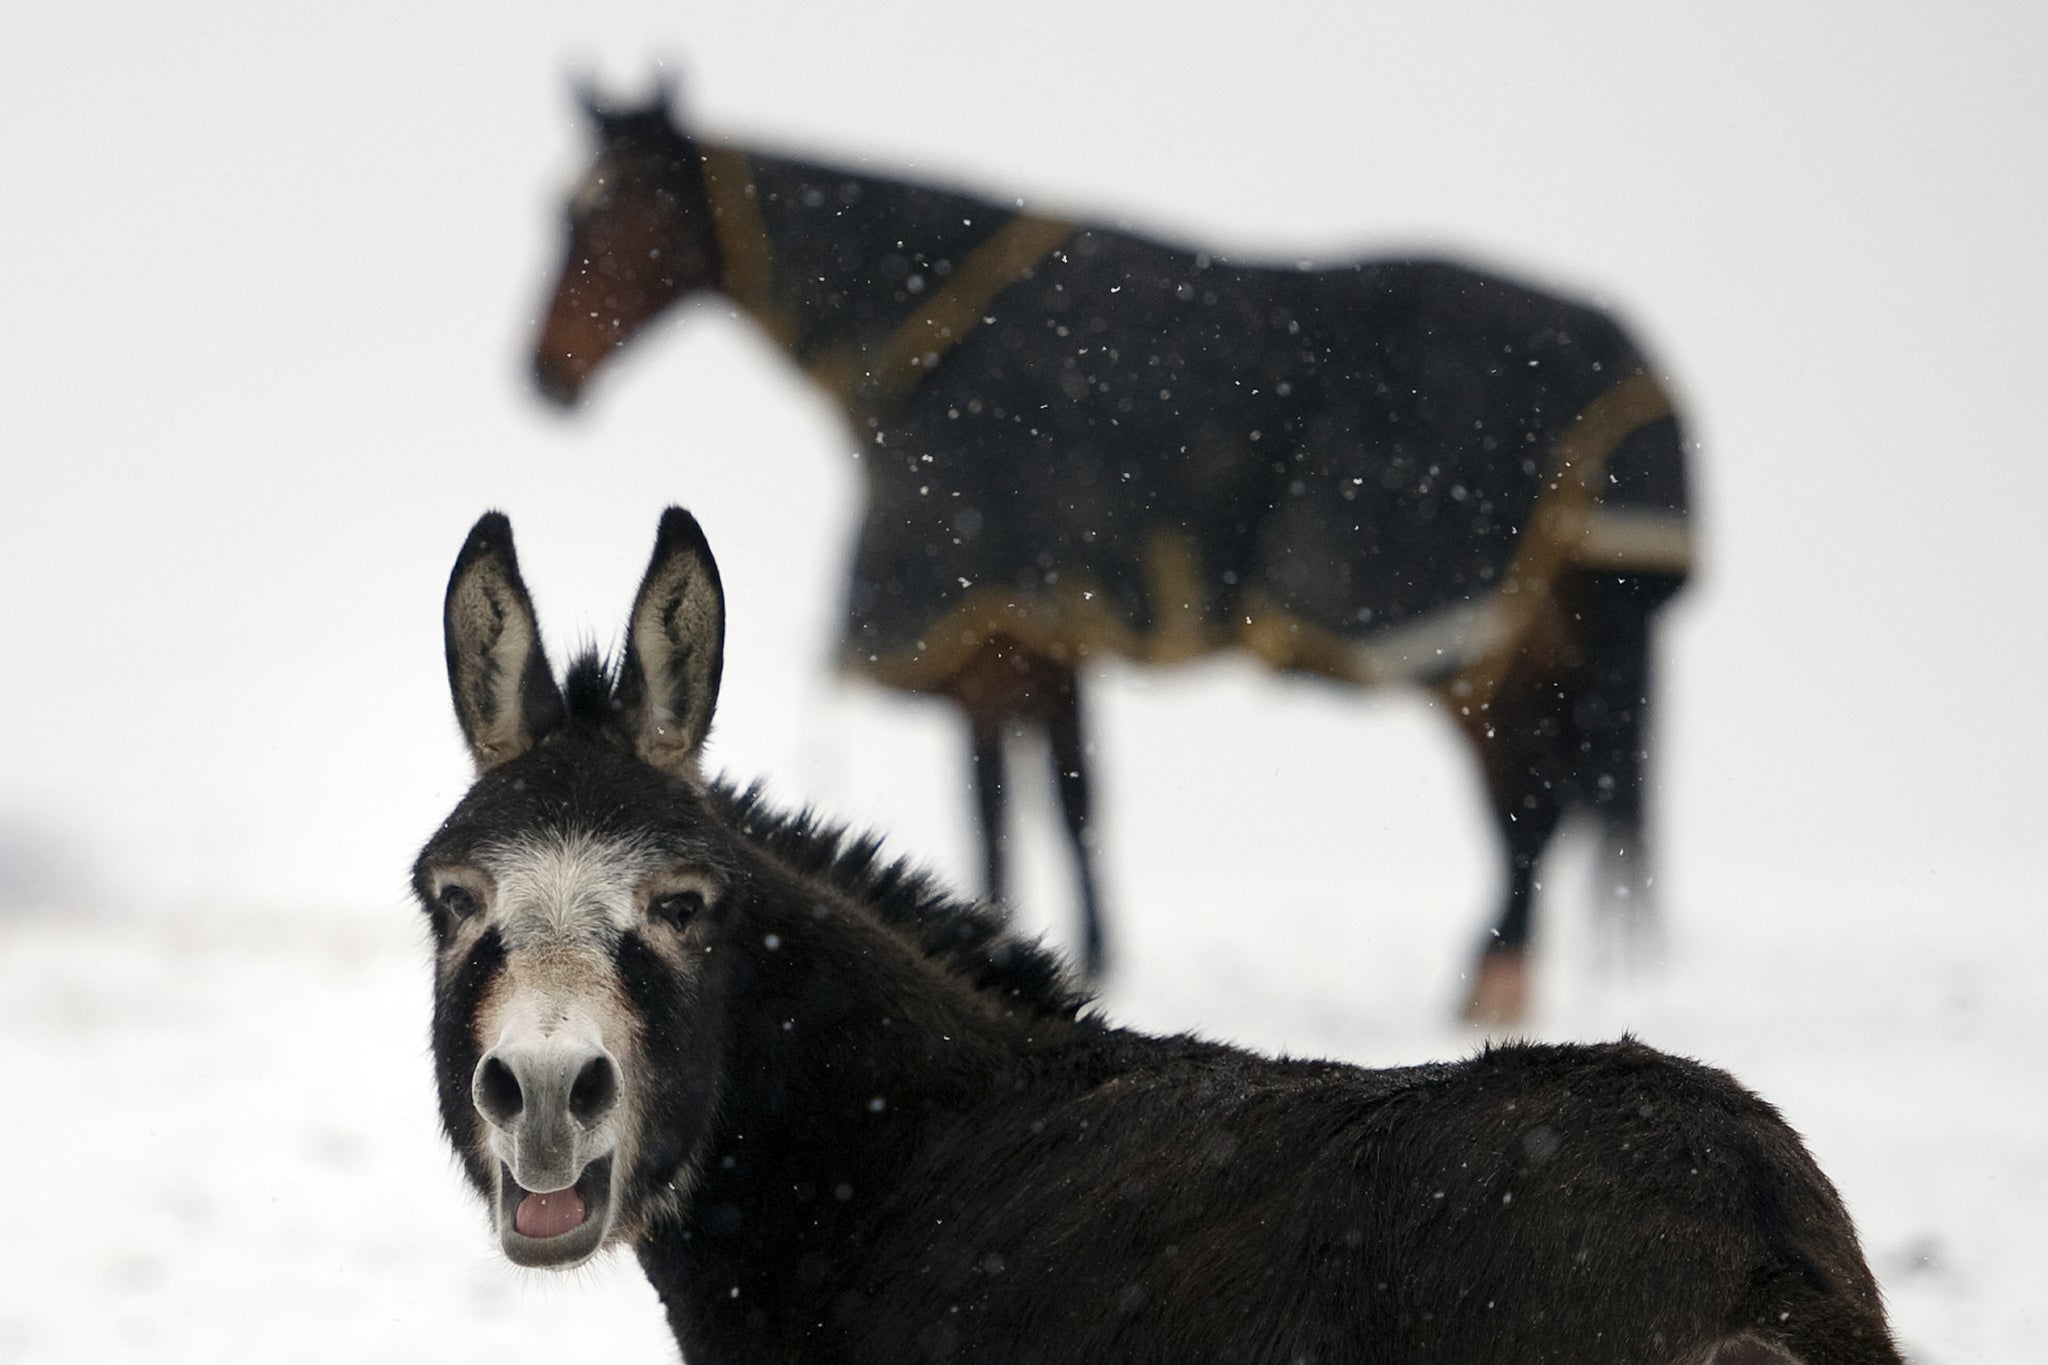 A donkey foiled a burglary with its loud braying